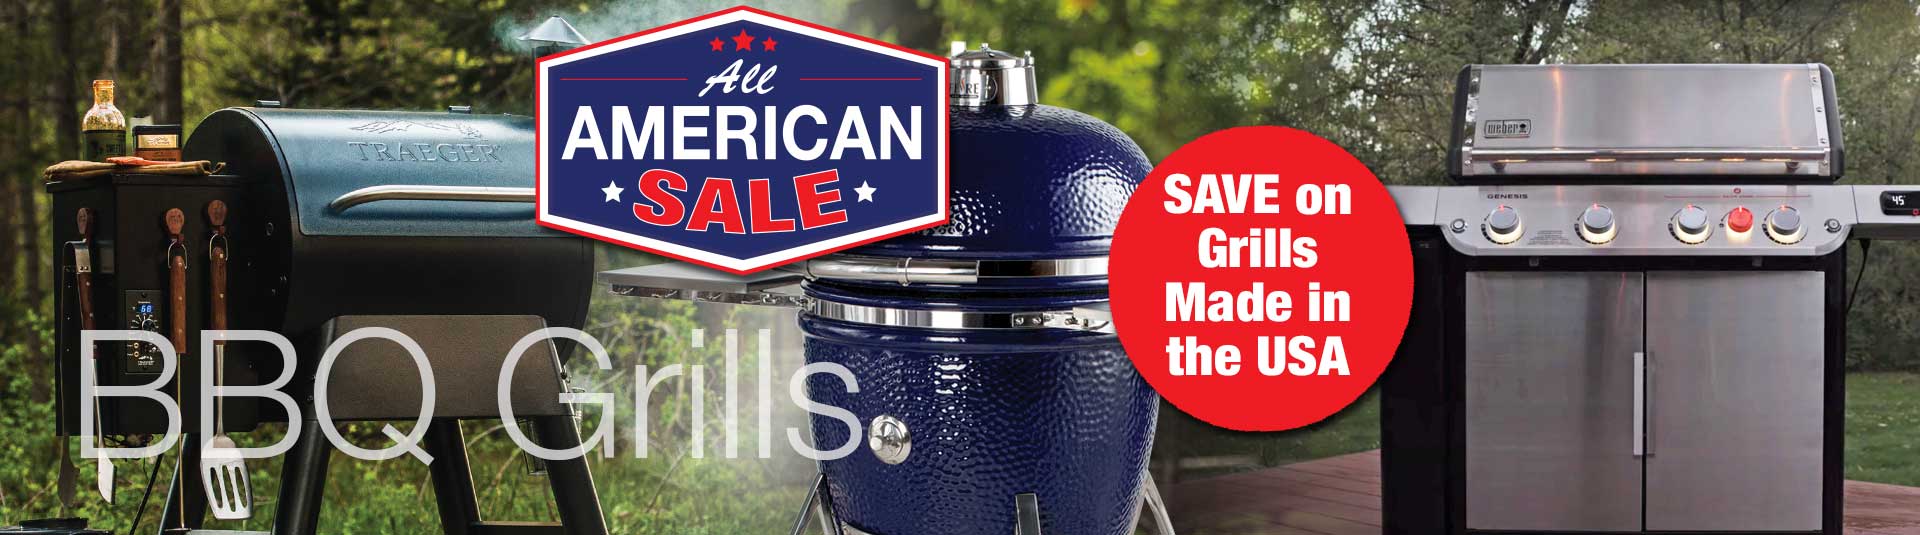 Save on BBQ Grills Made in the USA during the All American Sale at Benson Stone Company!